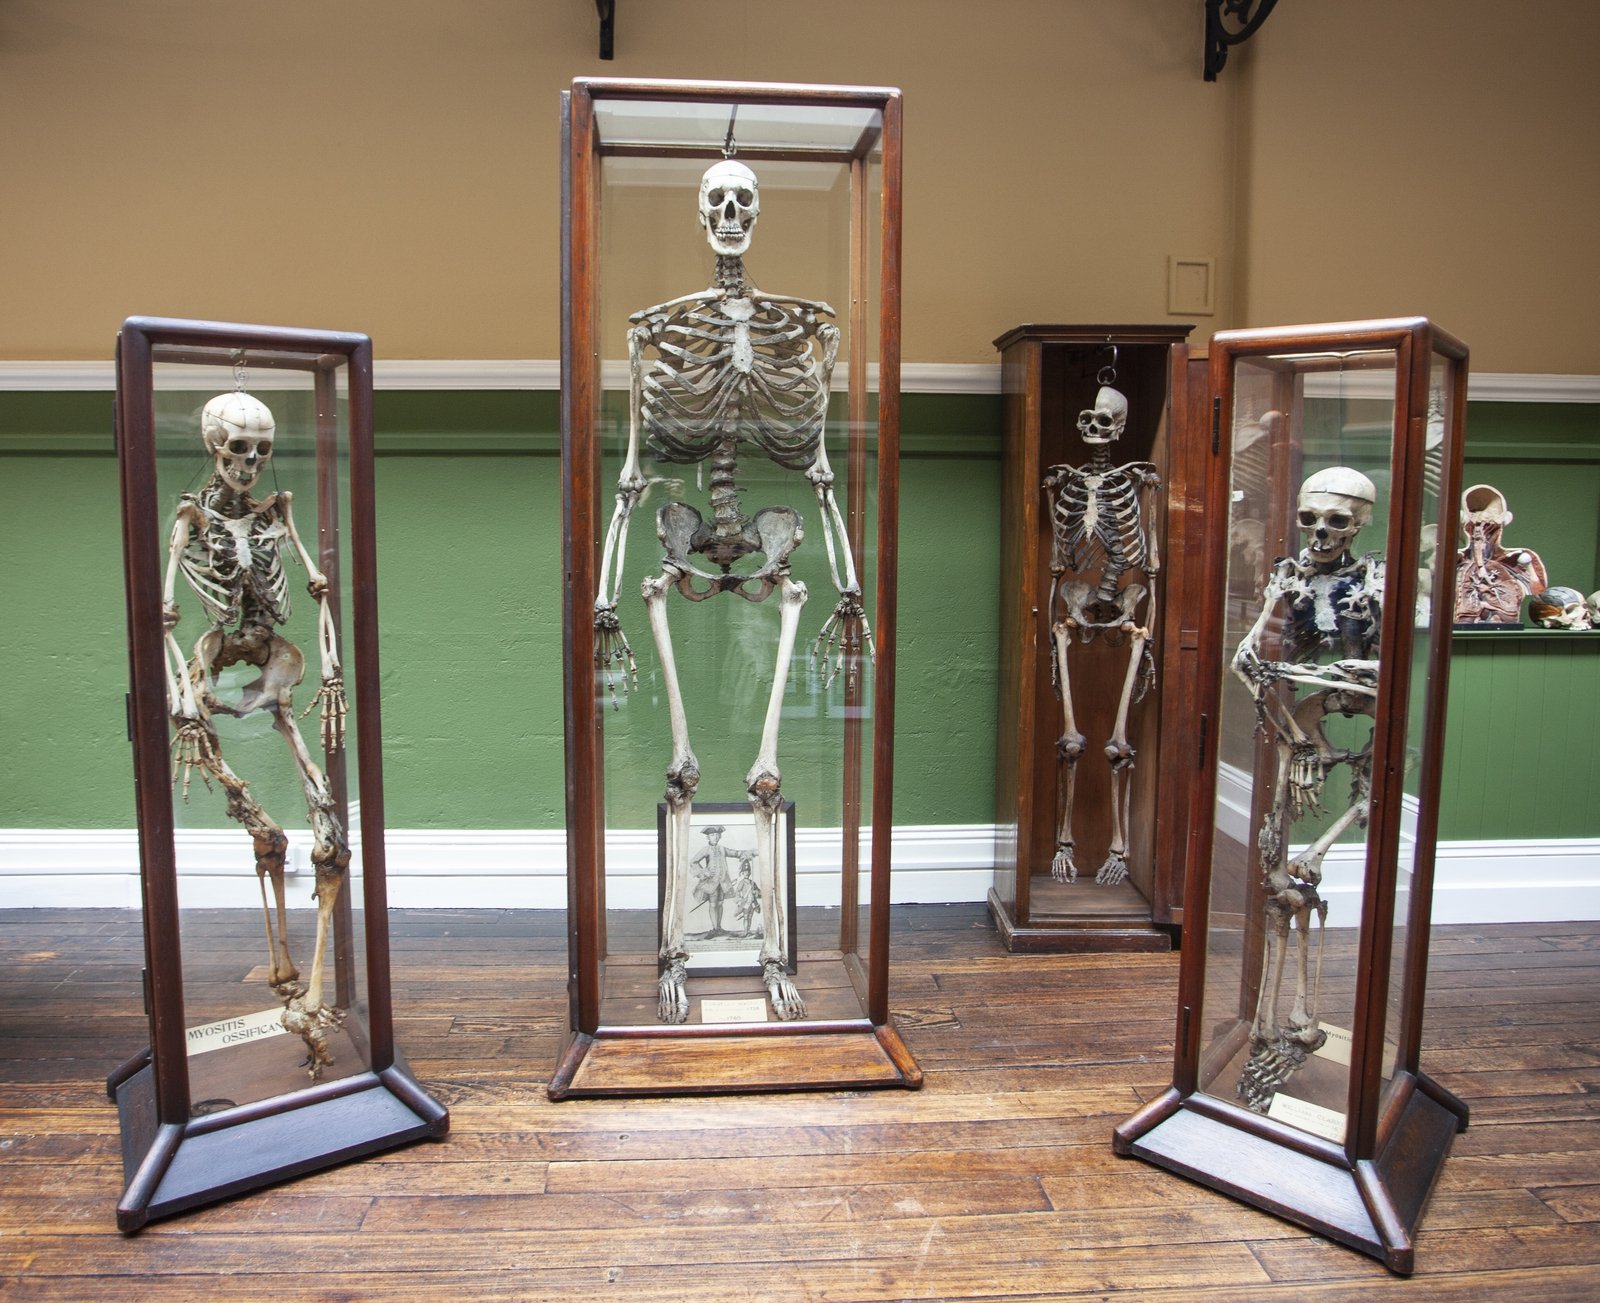 Image - The skeleton of William Magrath (center). Photo by Evi Numen.